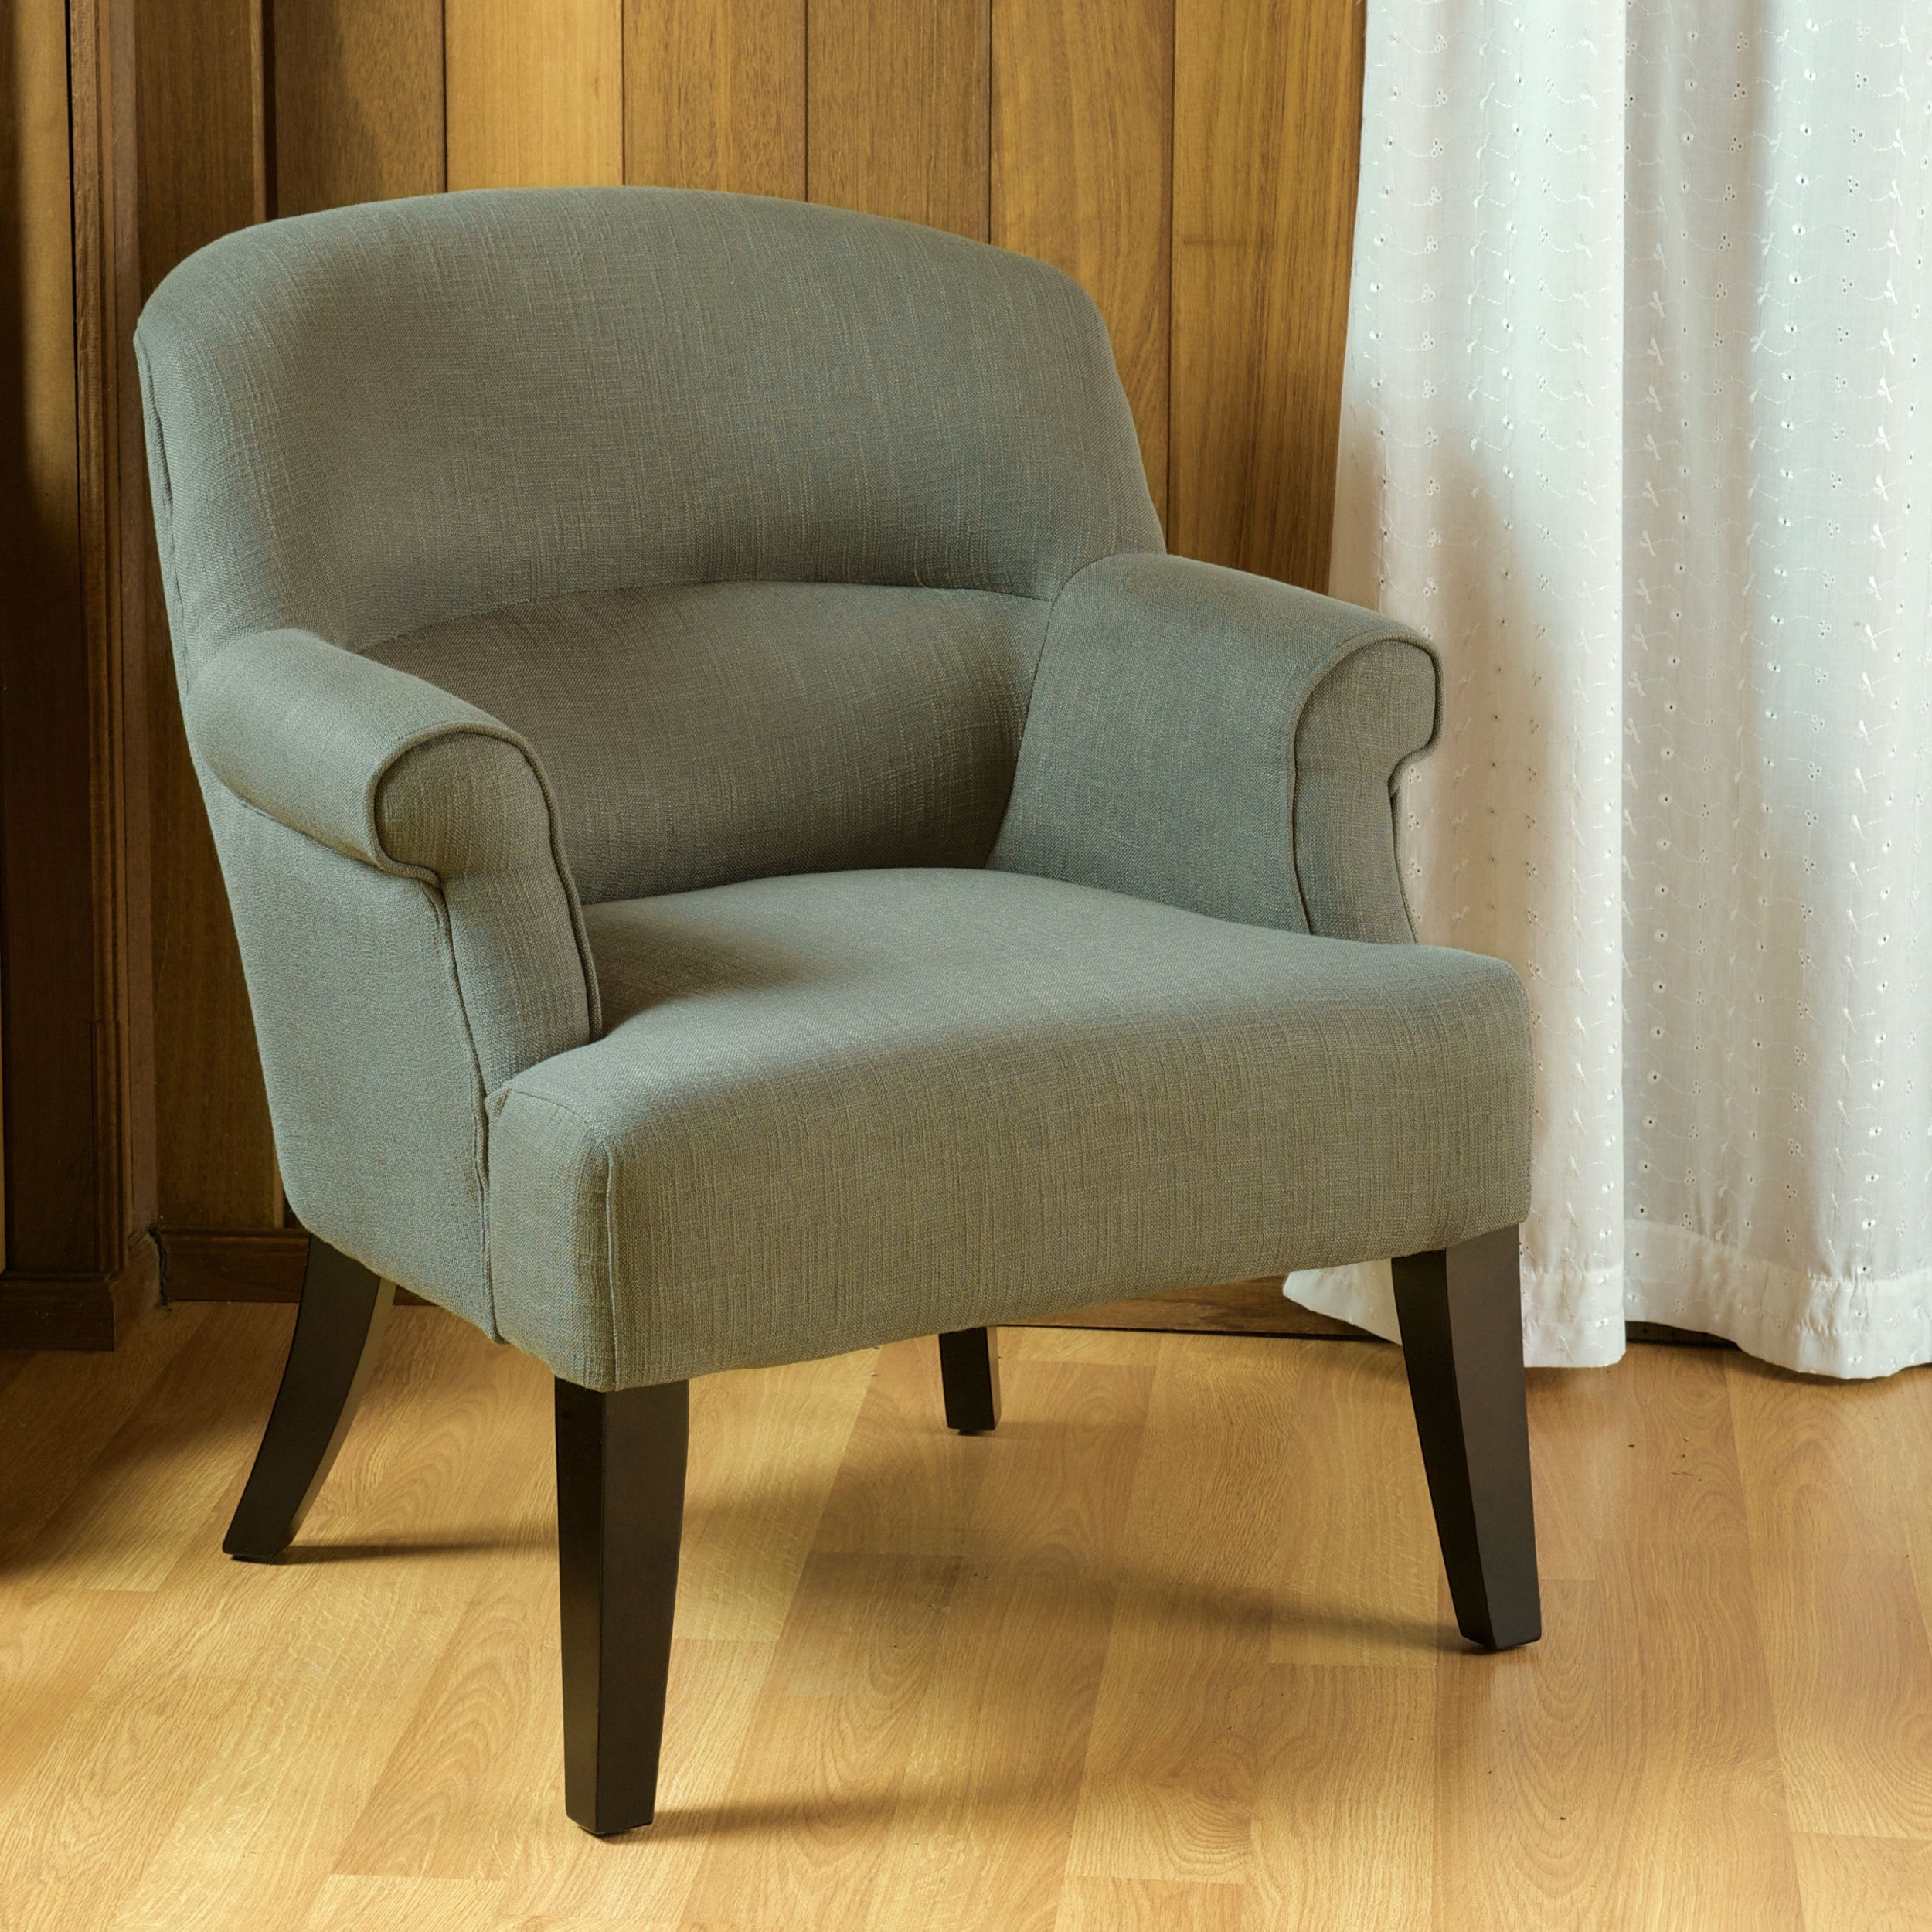 Christopher Knight Home Amelie Grey Fabric Club Chair (GreyFinish GreyFeatures Padded arm and backrestNo assembly RequiredSturdy constructionDimensions 33.47 inches high x 27.95 inches wide x 29.93 inches deepSeat dimensions 17.52 inches high x 26.18 